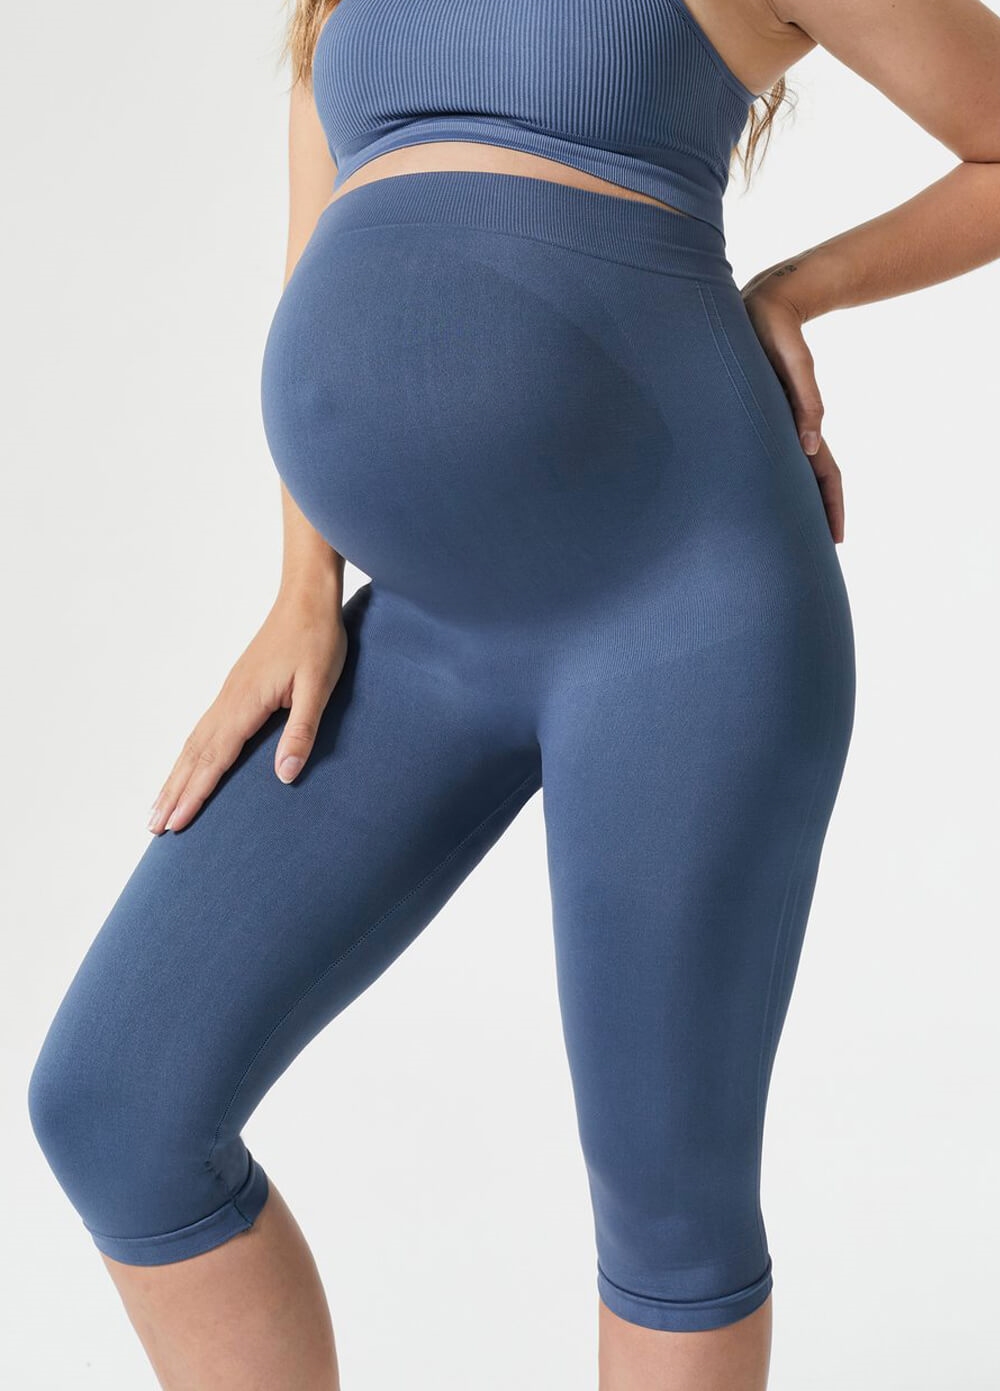 Blanqi Maternity Belly Support Straight Crop Jeans Blue Size 12 - $88 (41%  Off Retail) - From Brownide